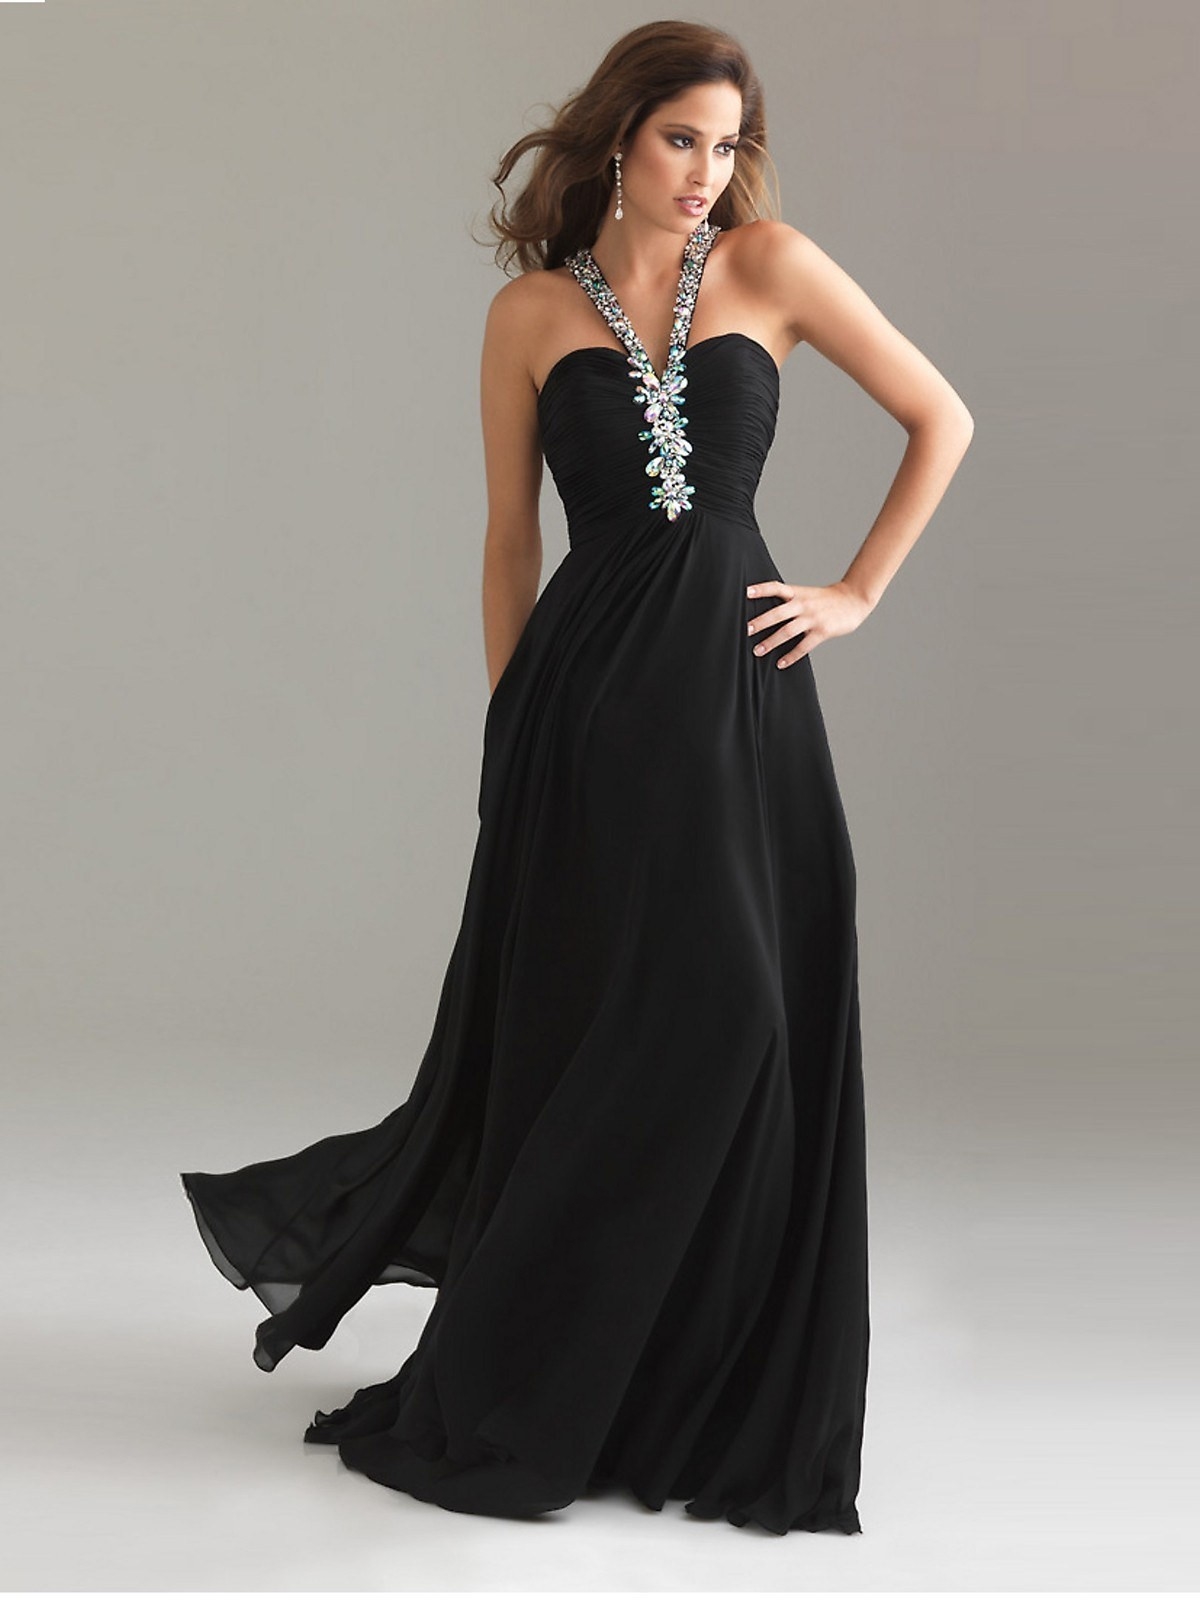 Best-Black-Prom-Dresses-2013-with-Image-of-Black-Redesign-on-Gallery